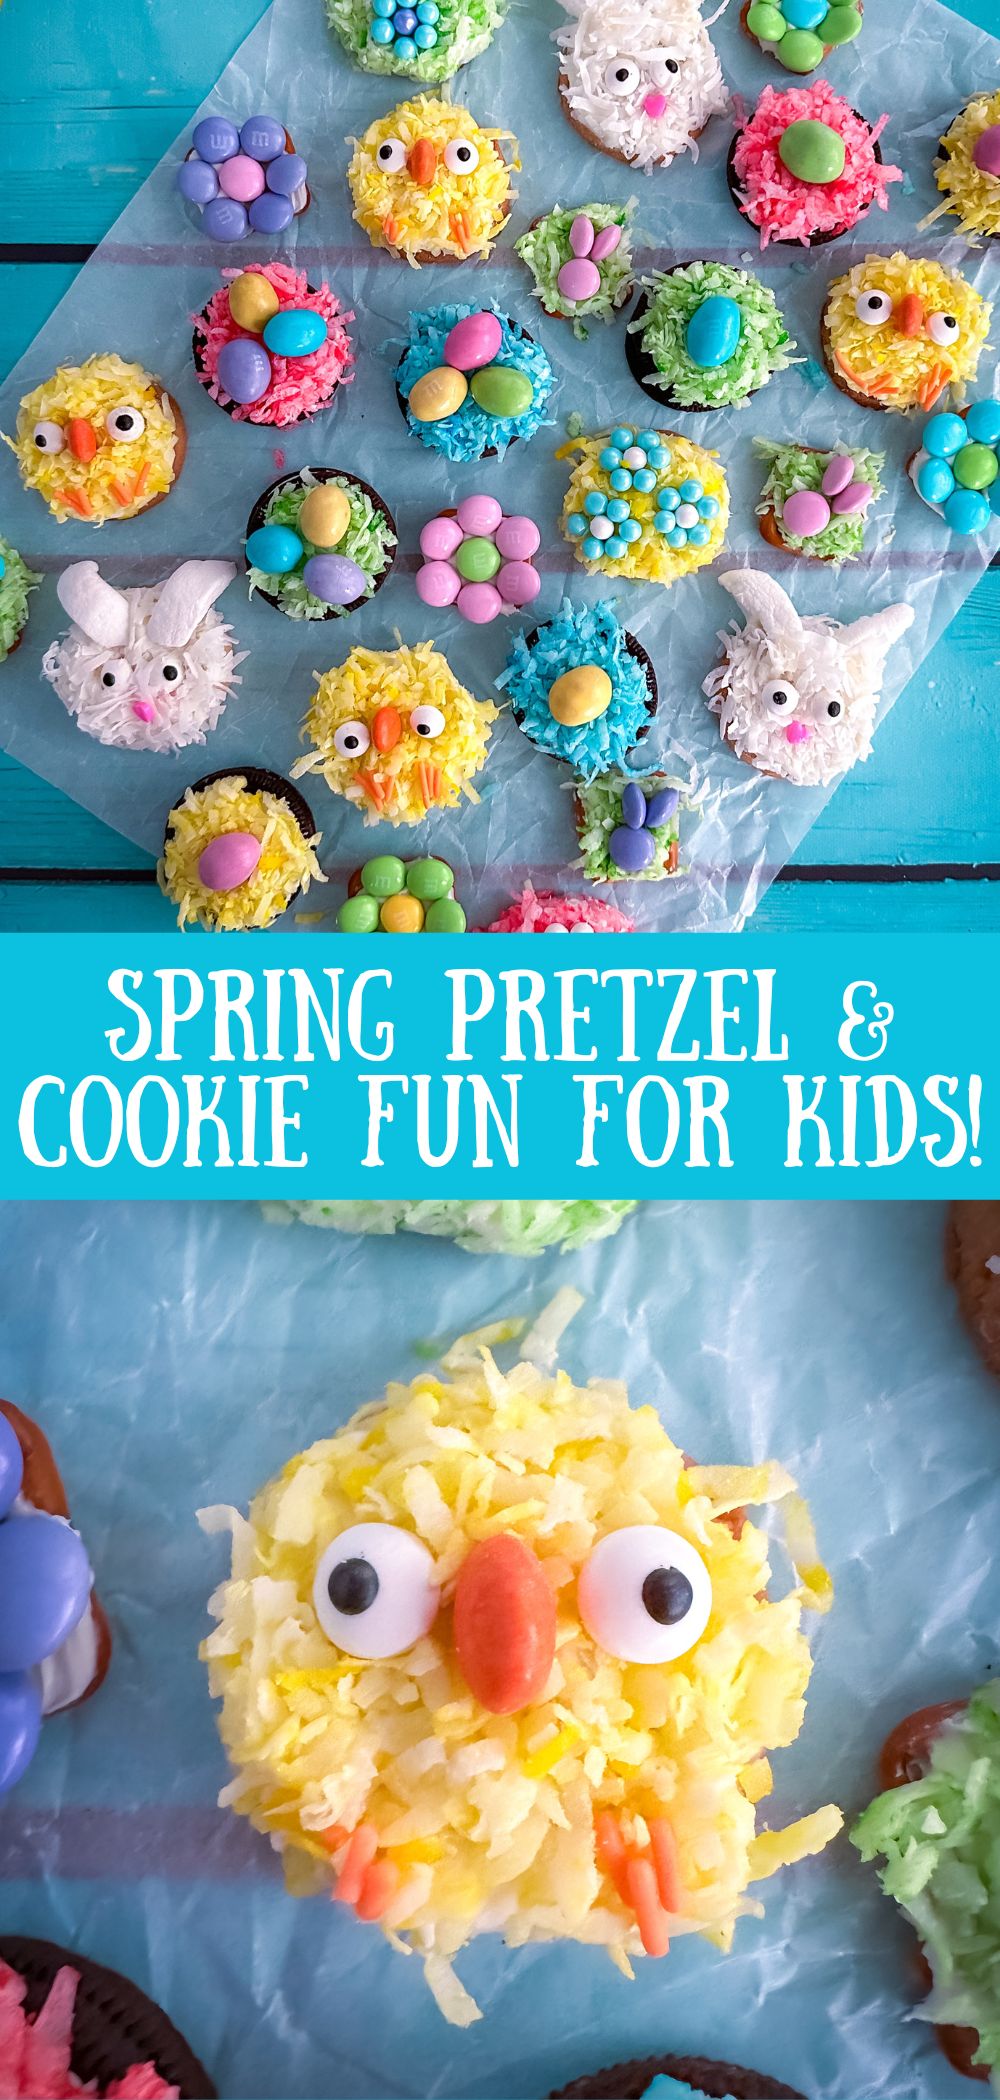 Spring pretzel and cookie decorating for kids